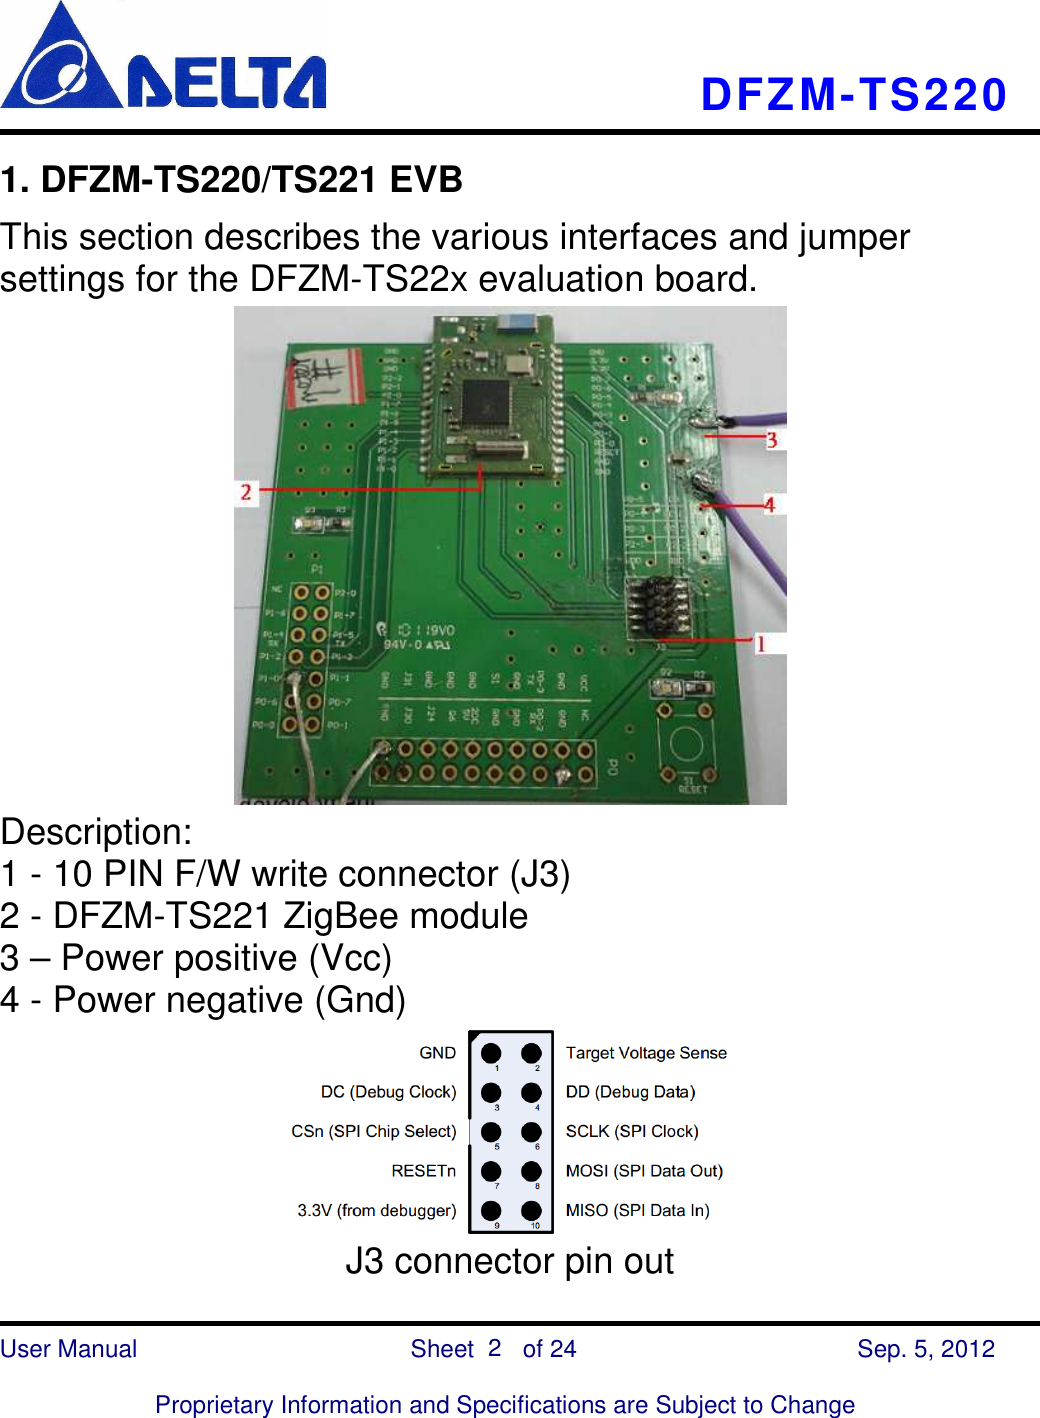    DFZM-TS220    User Manual                            Sheet        of 24      Sep. 5, 2012  Proprietary Information and Specifications are Subject to Change 2 1. DFZM-TS220/TS221 EVB This section describes the various interfaces and jumper settings for the DFZM-TS22x evaluation board.  Description: 1 - 10 PIN F/W write connector (J3)   2 - DFZM-TS221 ZigBee module 3 – Power positive (Vcc)   4 - Power negative (Gnd)  J3 connector pin out 